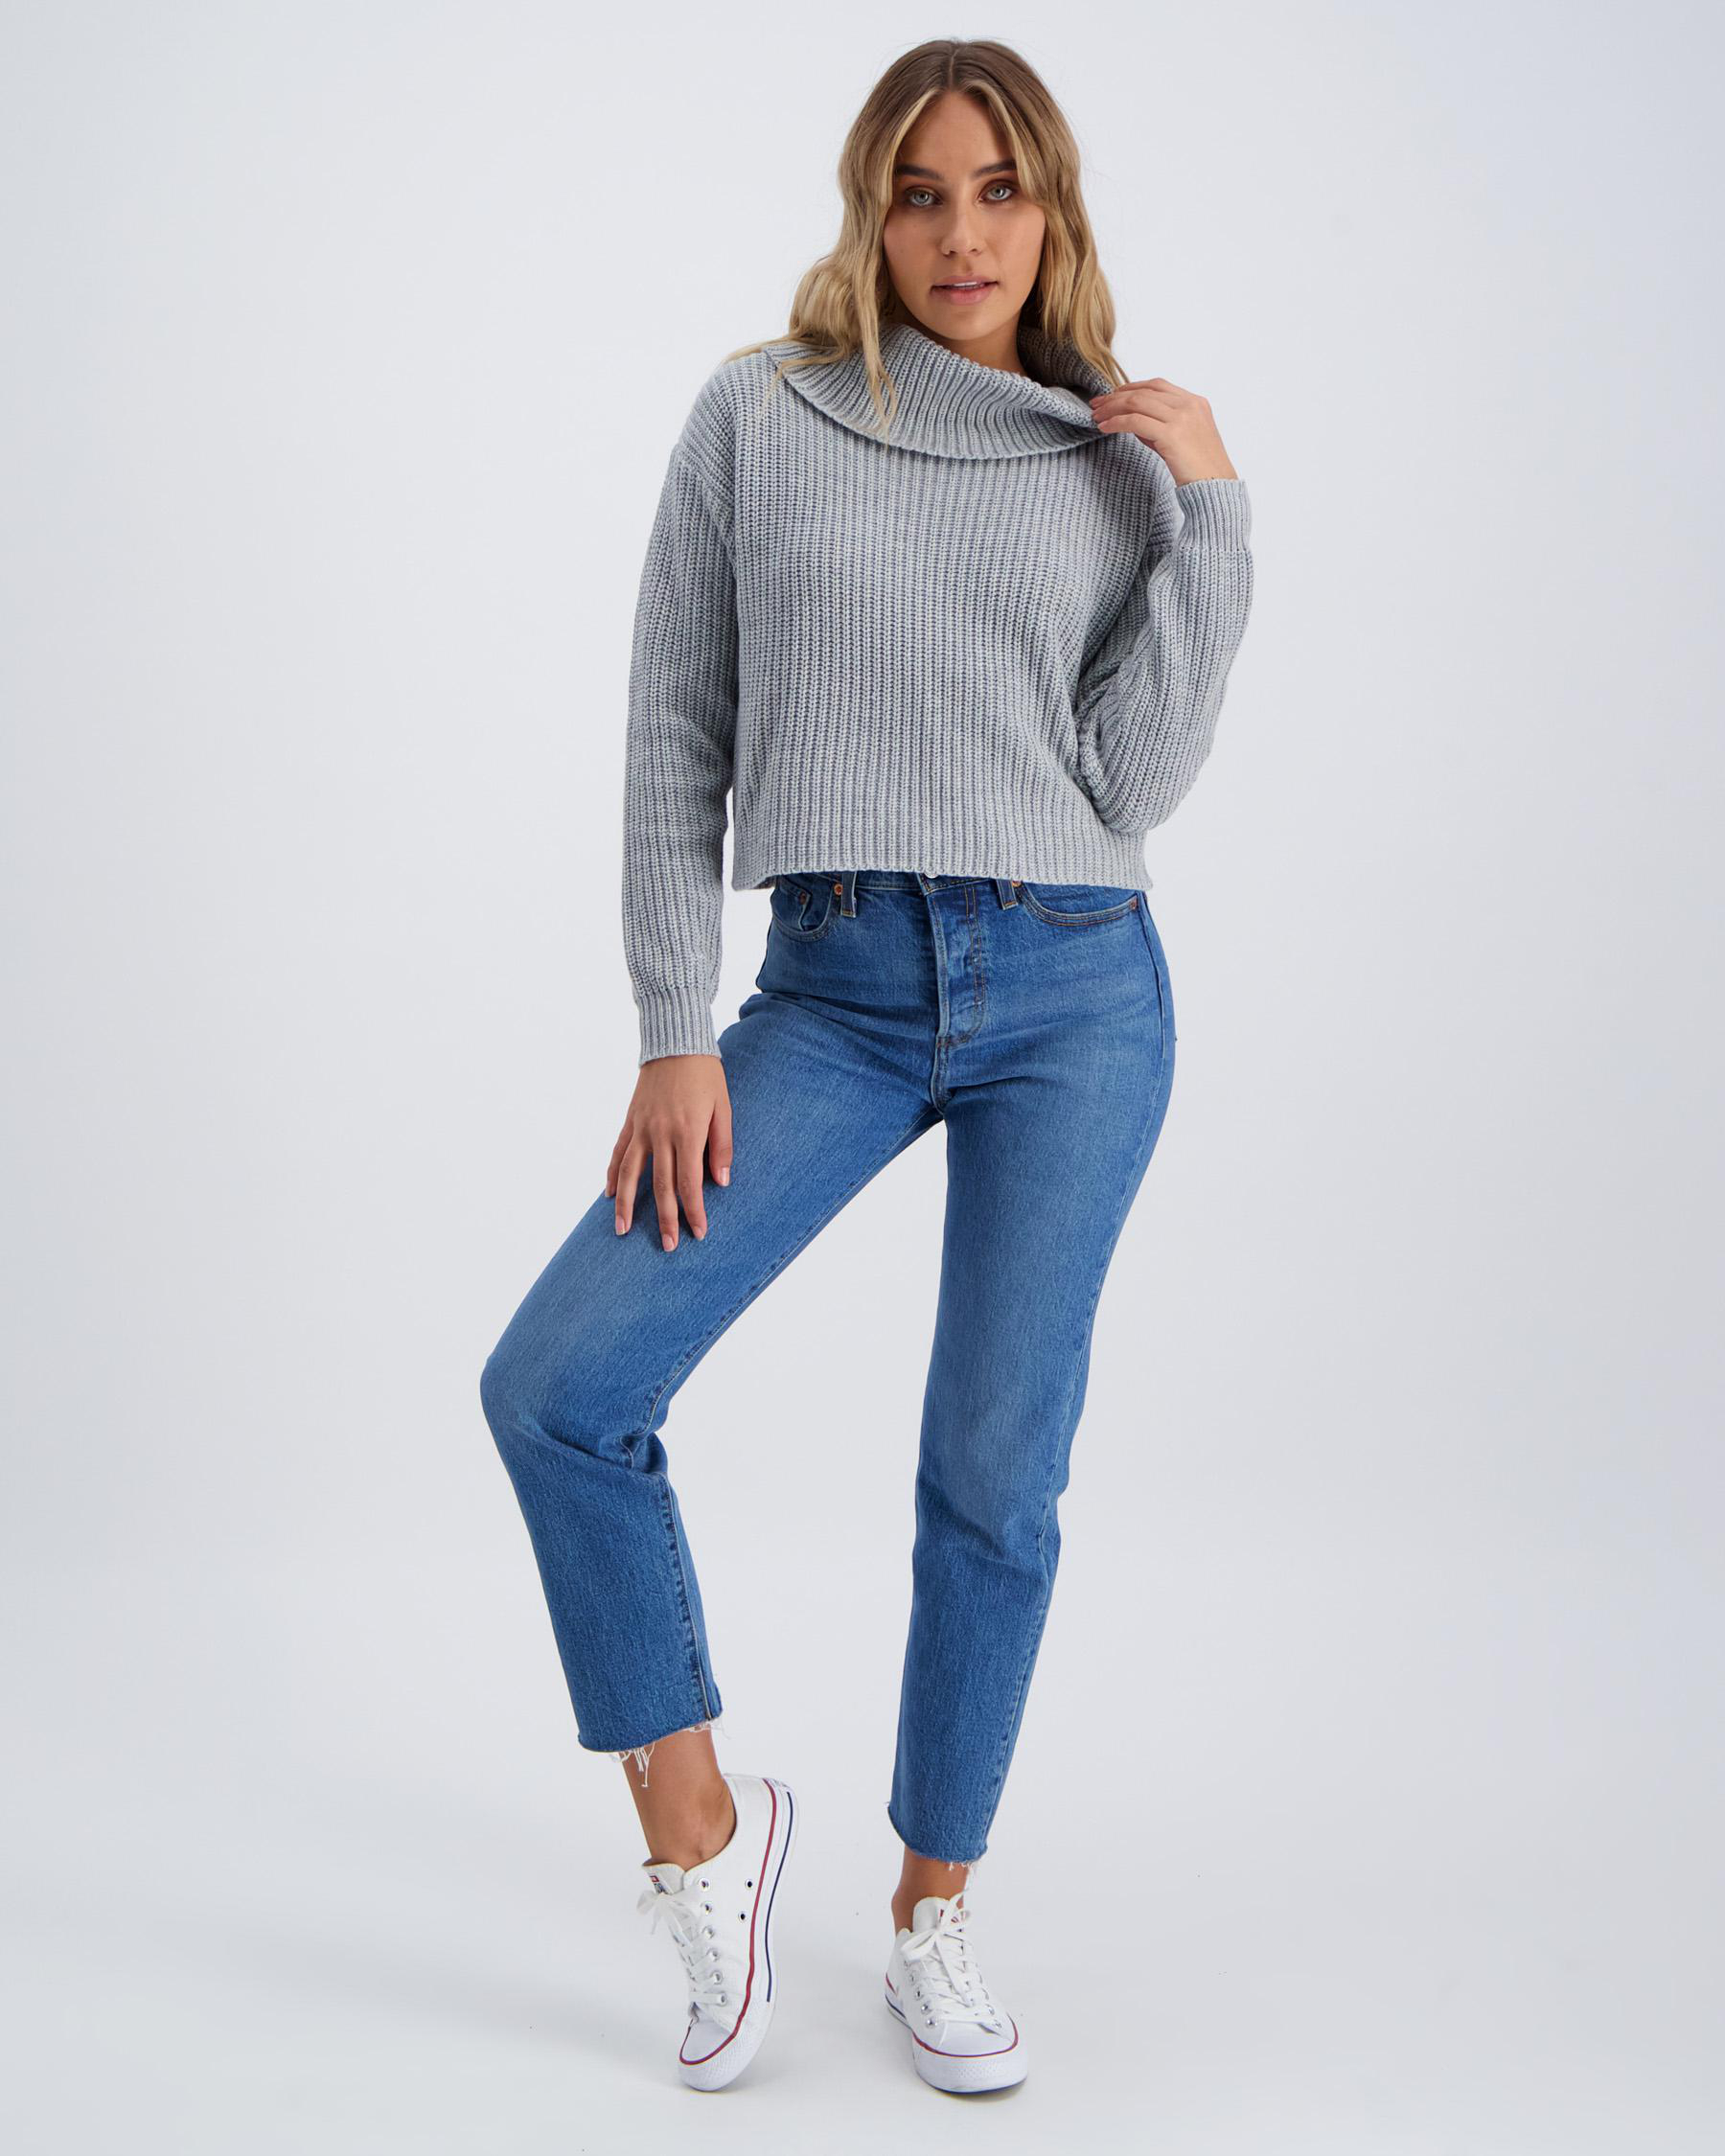 Shop Ava And Ever Jemma Tunnel Knit Jumper In Grey Marle - Fast ...